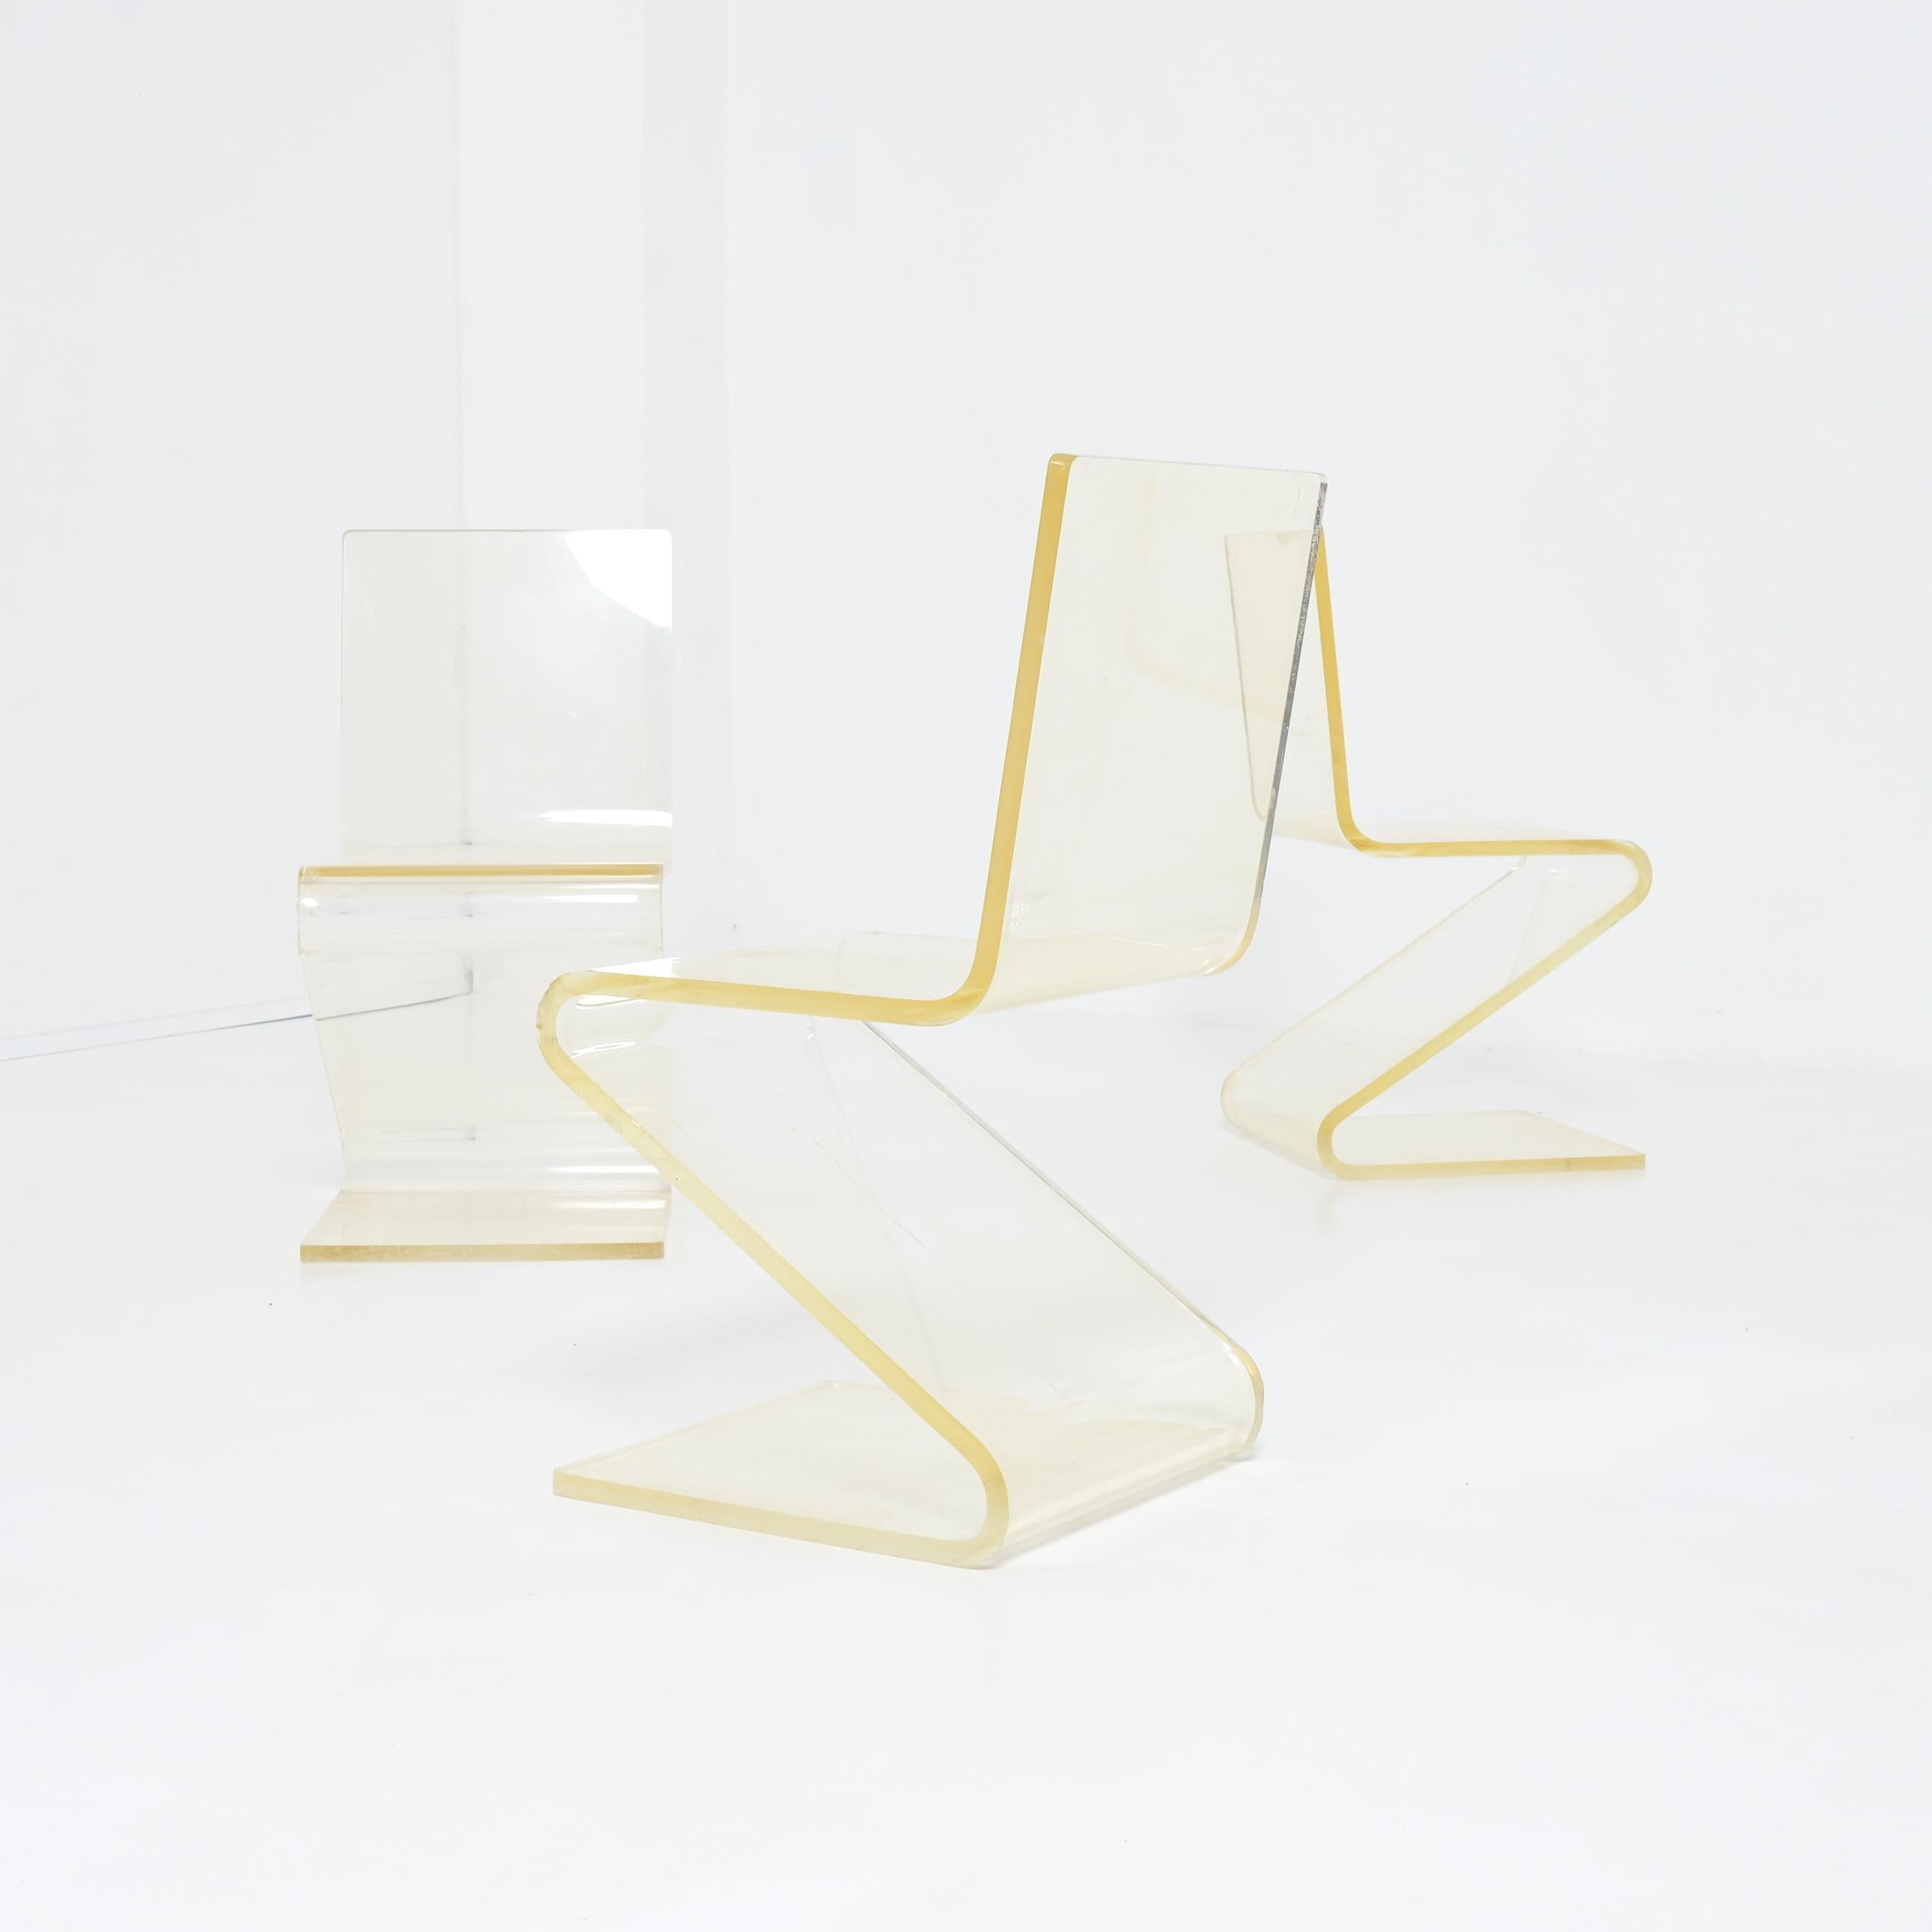 These Zig Zag chairs were designed and produced in the 1960s. After more than 60 years of use, they are still in good vintage condition. The transparent yellow plexiglass or perspex has been used intensively, resulting in many scratches. The